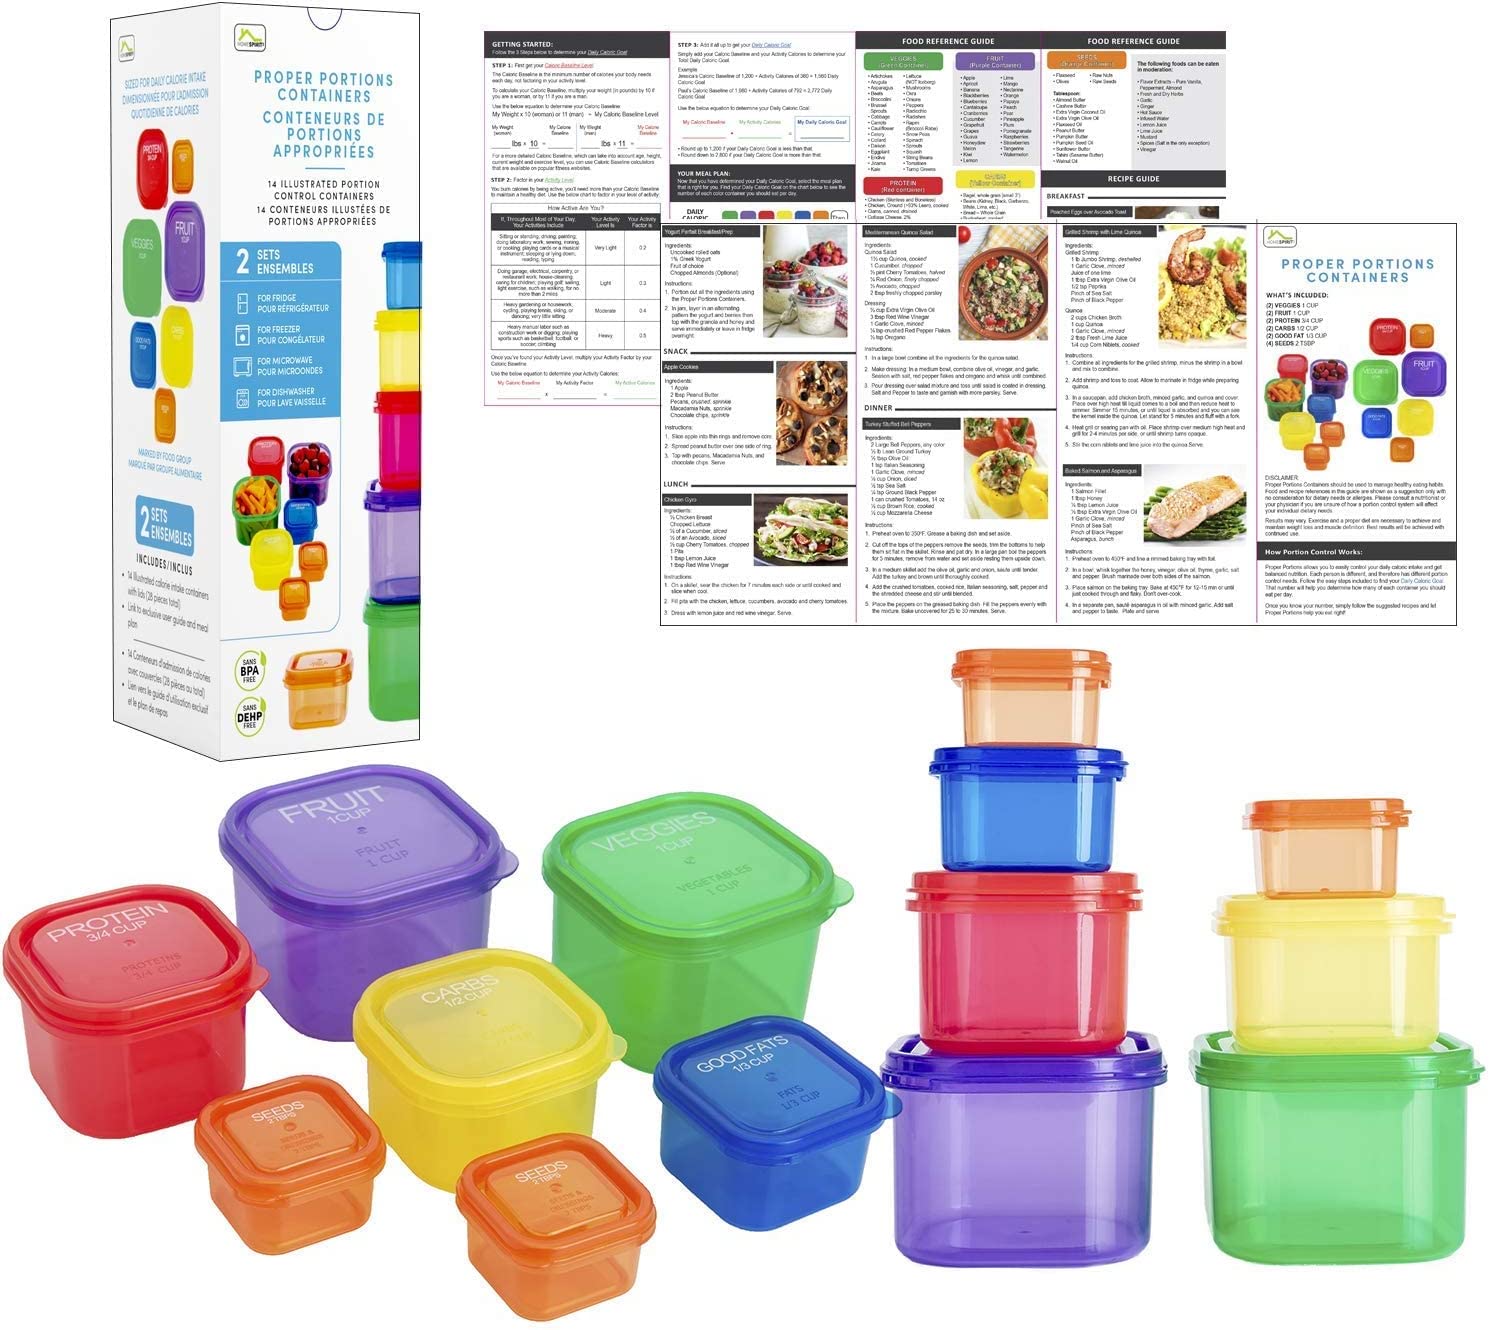 Home Spirit Proper Portions Containers for Weight Loss for Adults, 21 Day Diet and Food Plan, Bariatric Portion Control Cups, 2 Sets of 14 Containers, Sized for Daily Calorie Intake 2pk